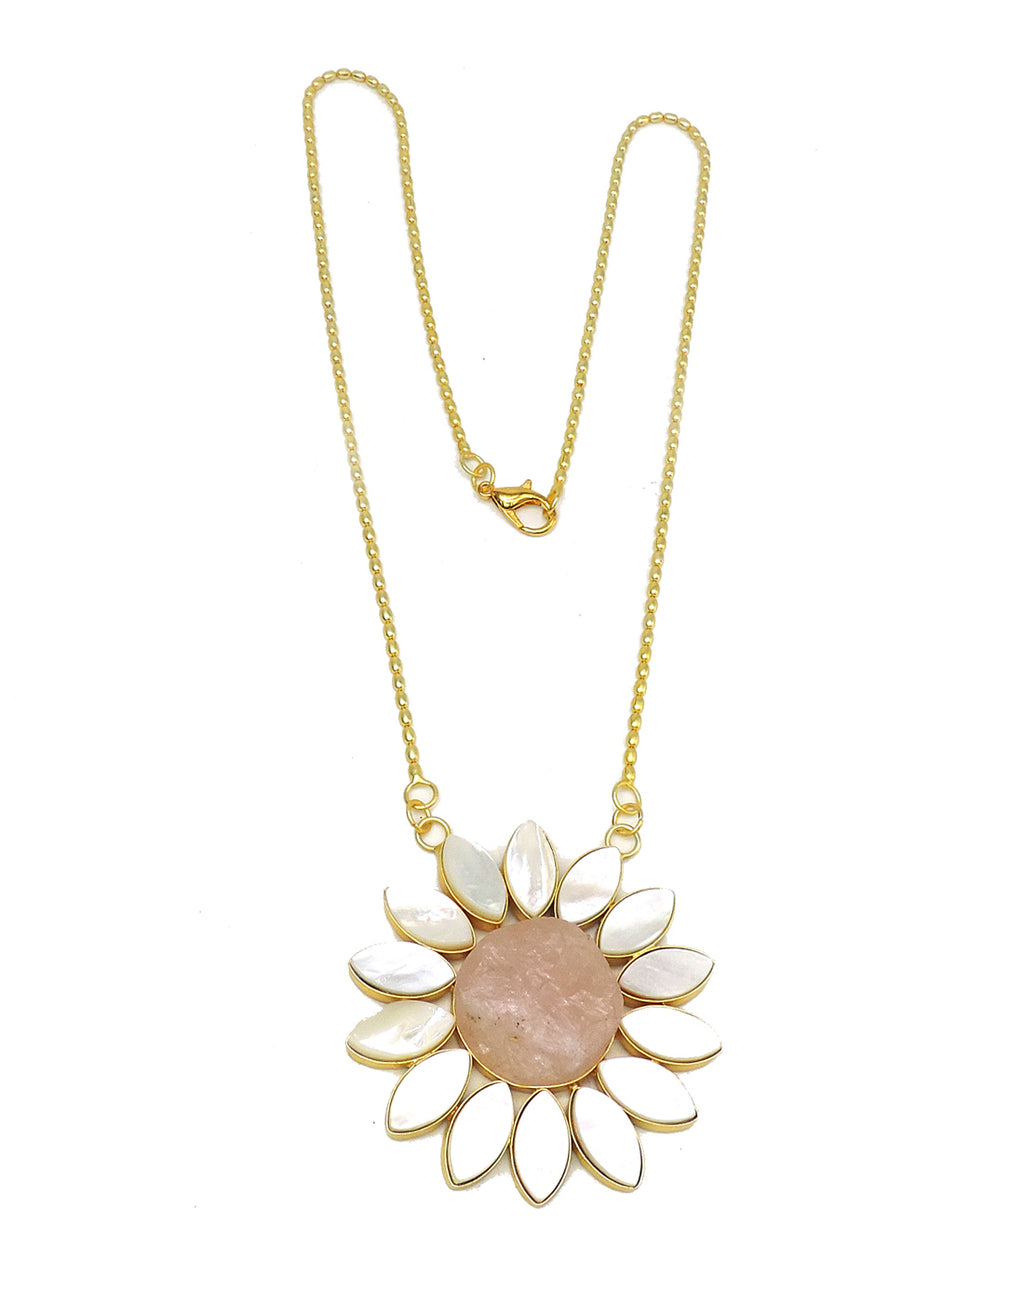 Rose Sunflower Necklace - Statement Necklaces - Gold-Plated & Hypoallergenic Jewellery - Made in India - Dubai Jewellery - Dori